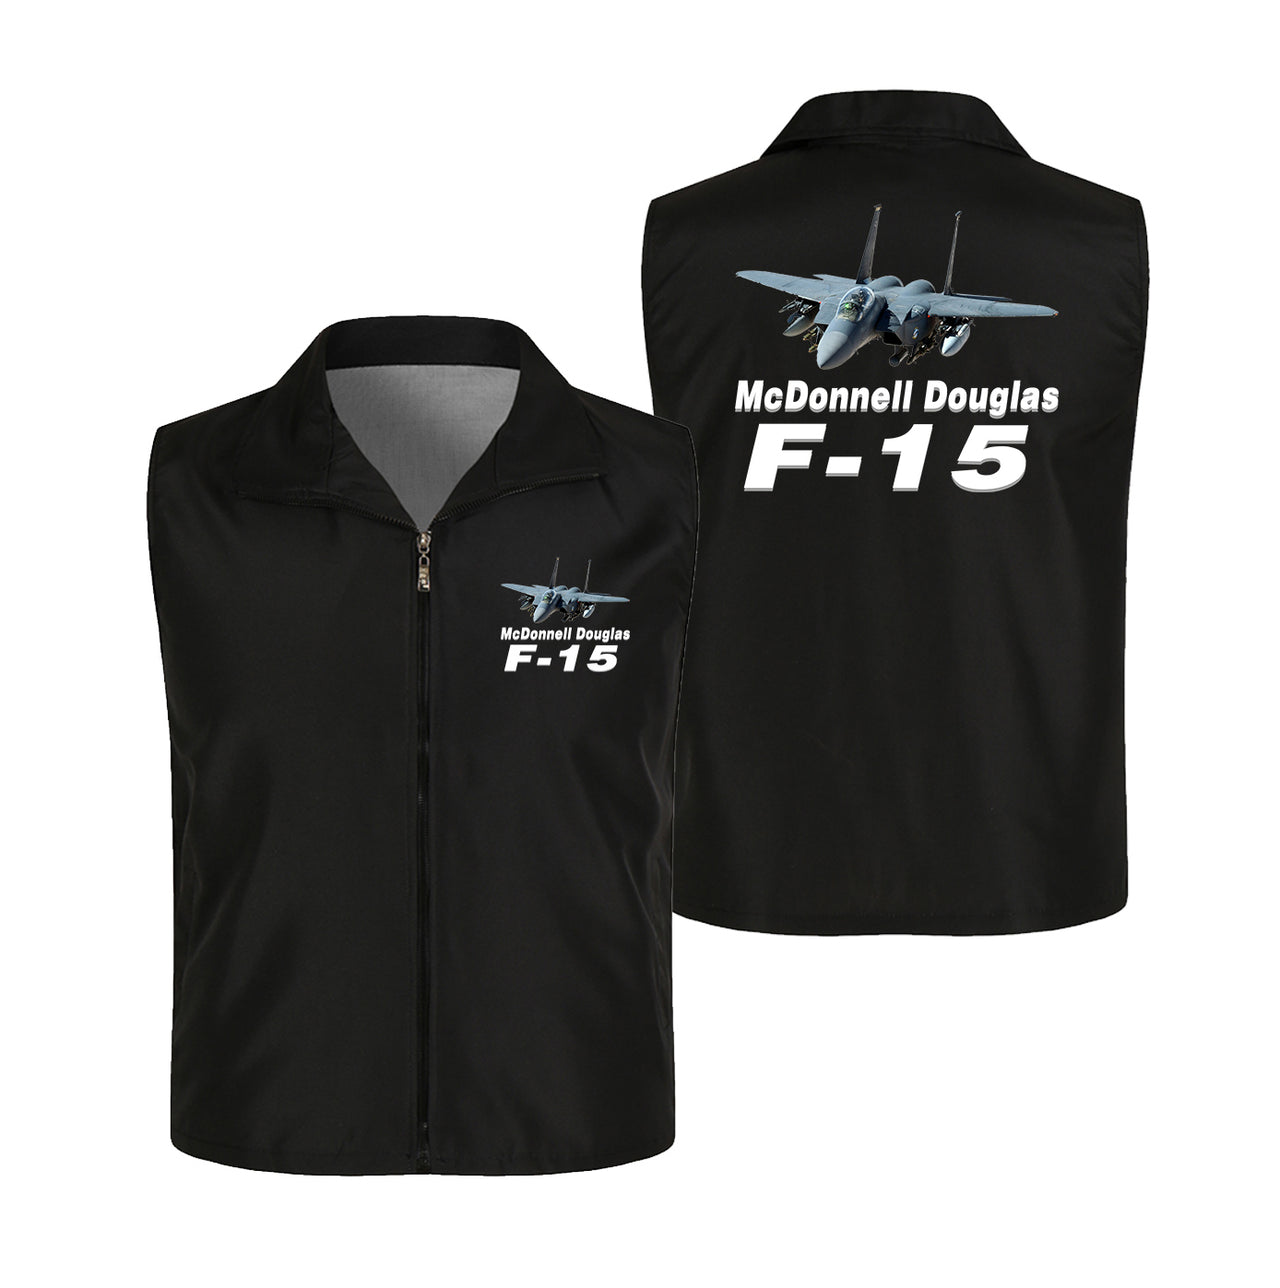 The McDonnell Douglas F15 Designed Thin Style Vests